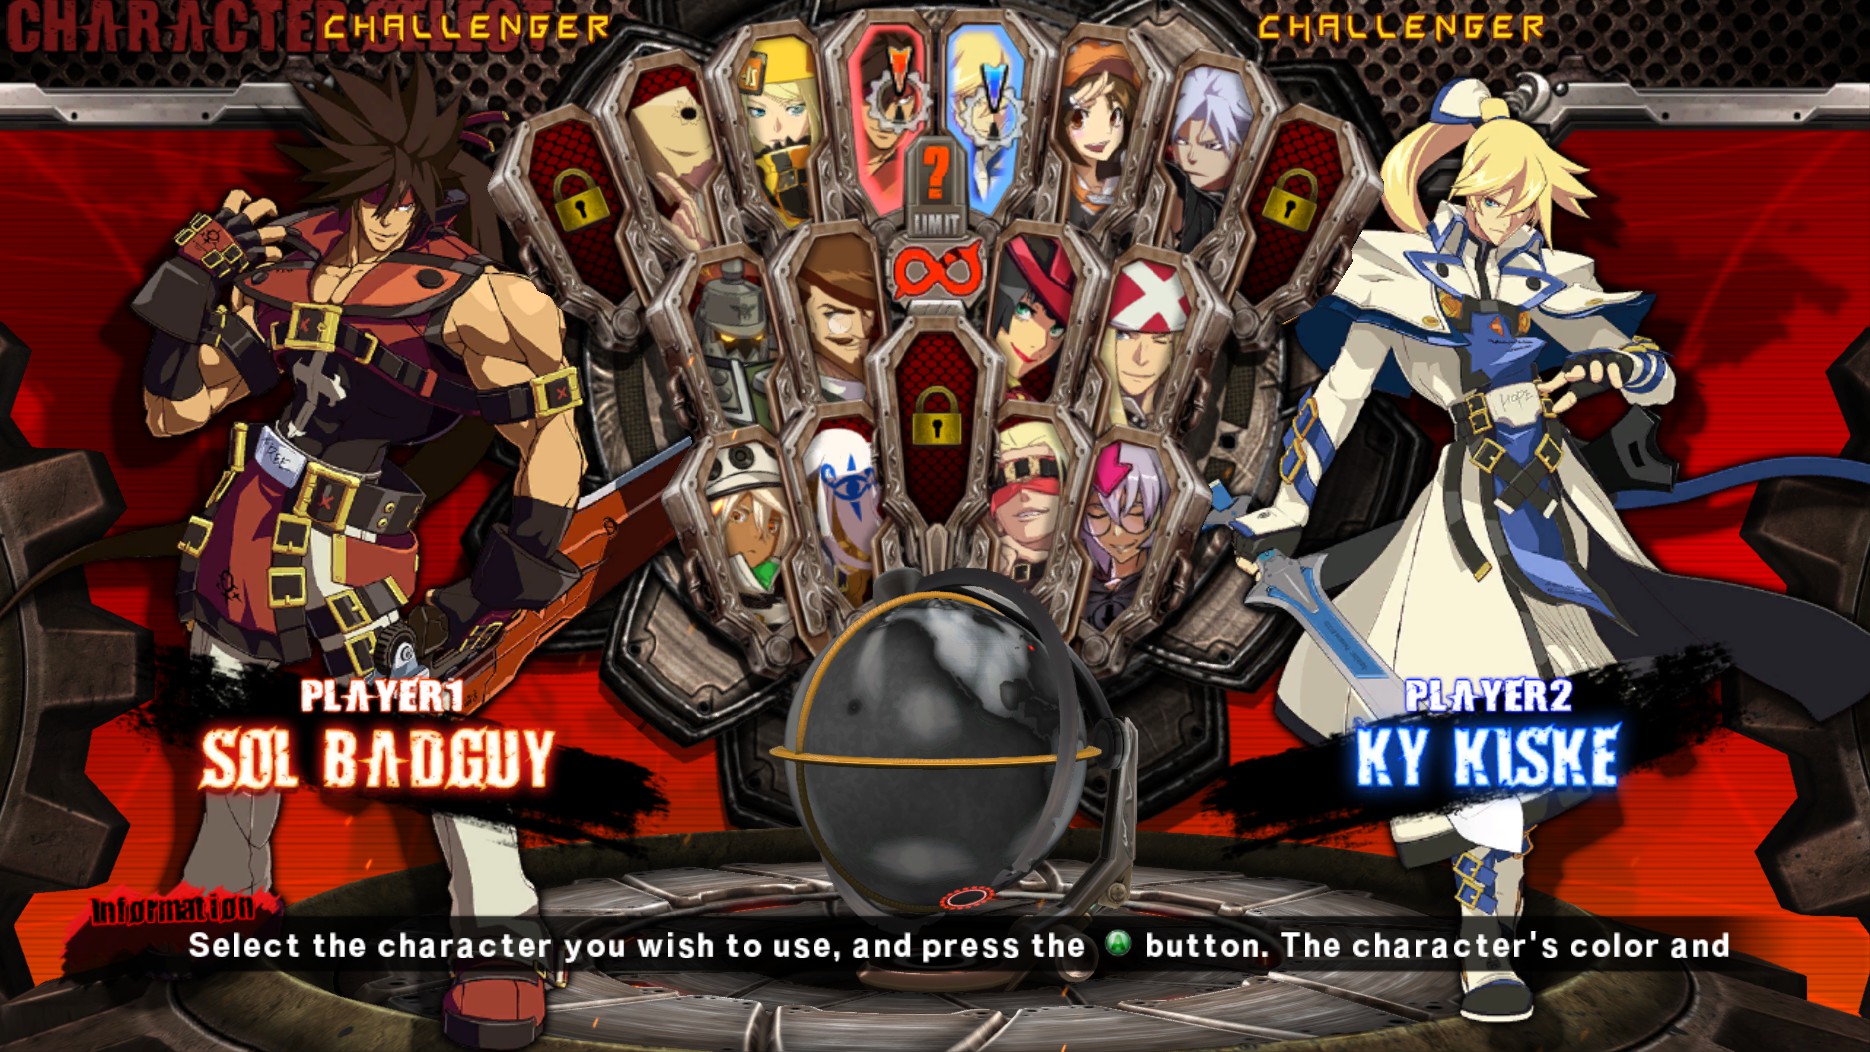 Save 90% on GUILTY GEAR Xrd -SIGN- on Steam